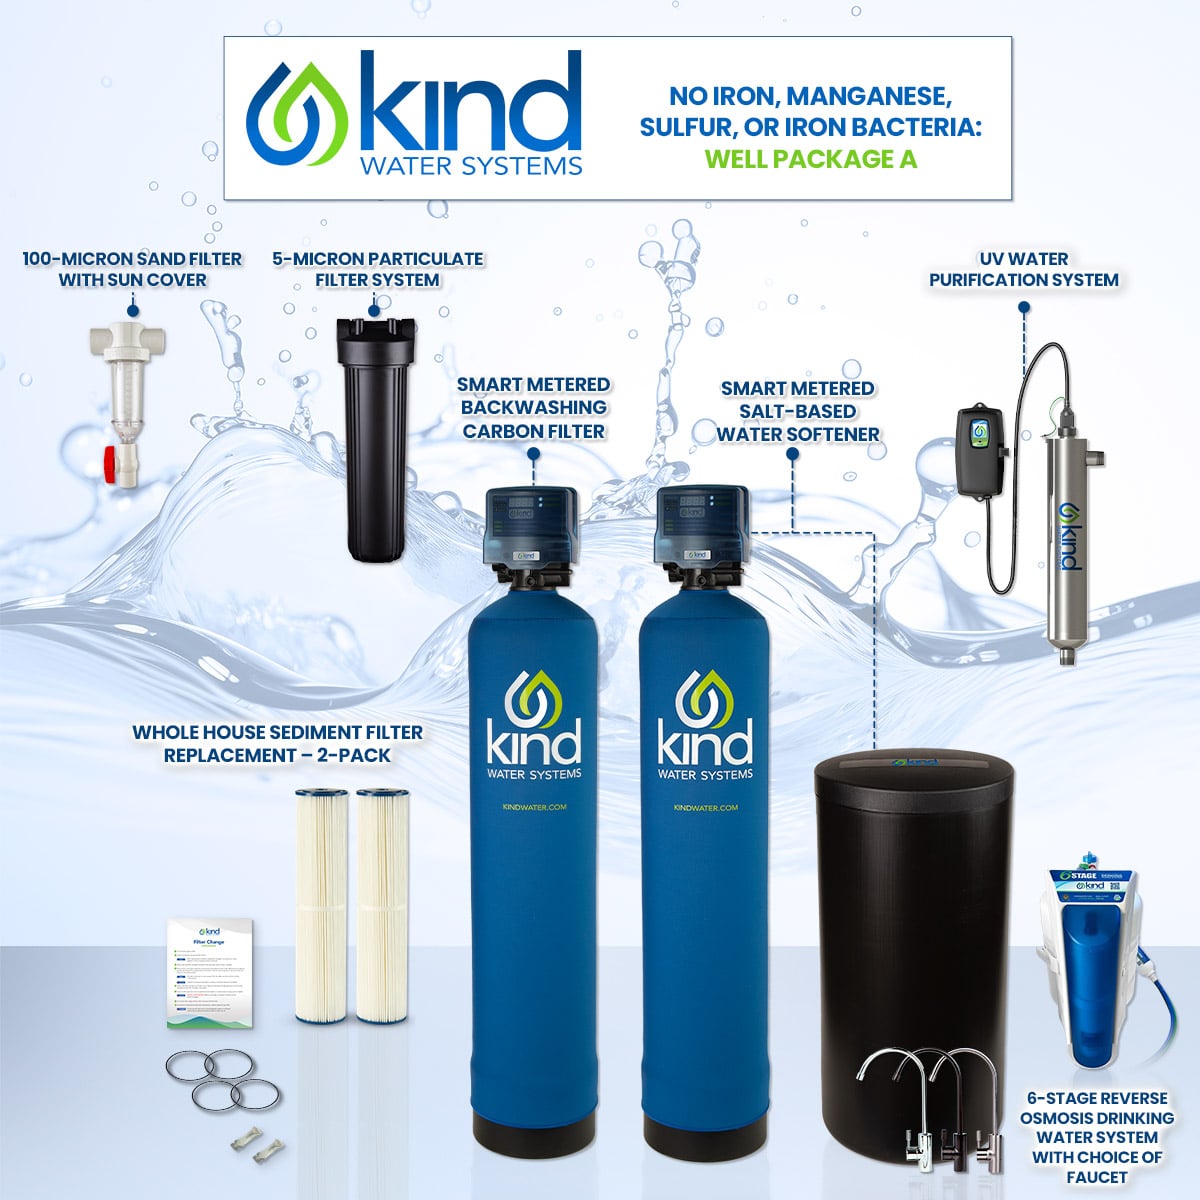 No Iron, Manganese, Sulfur, or Iron Bacteria - Well Water Package A